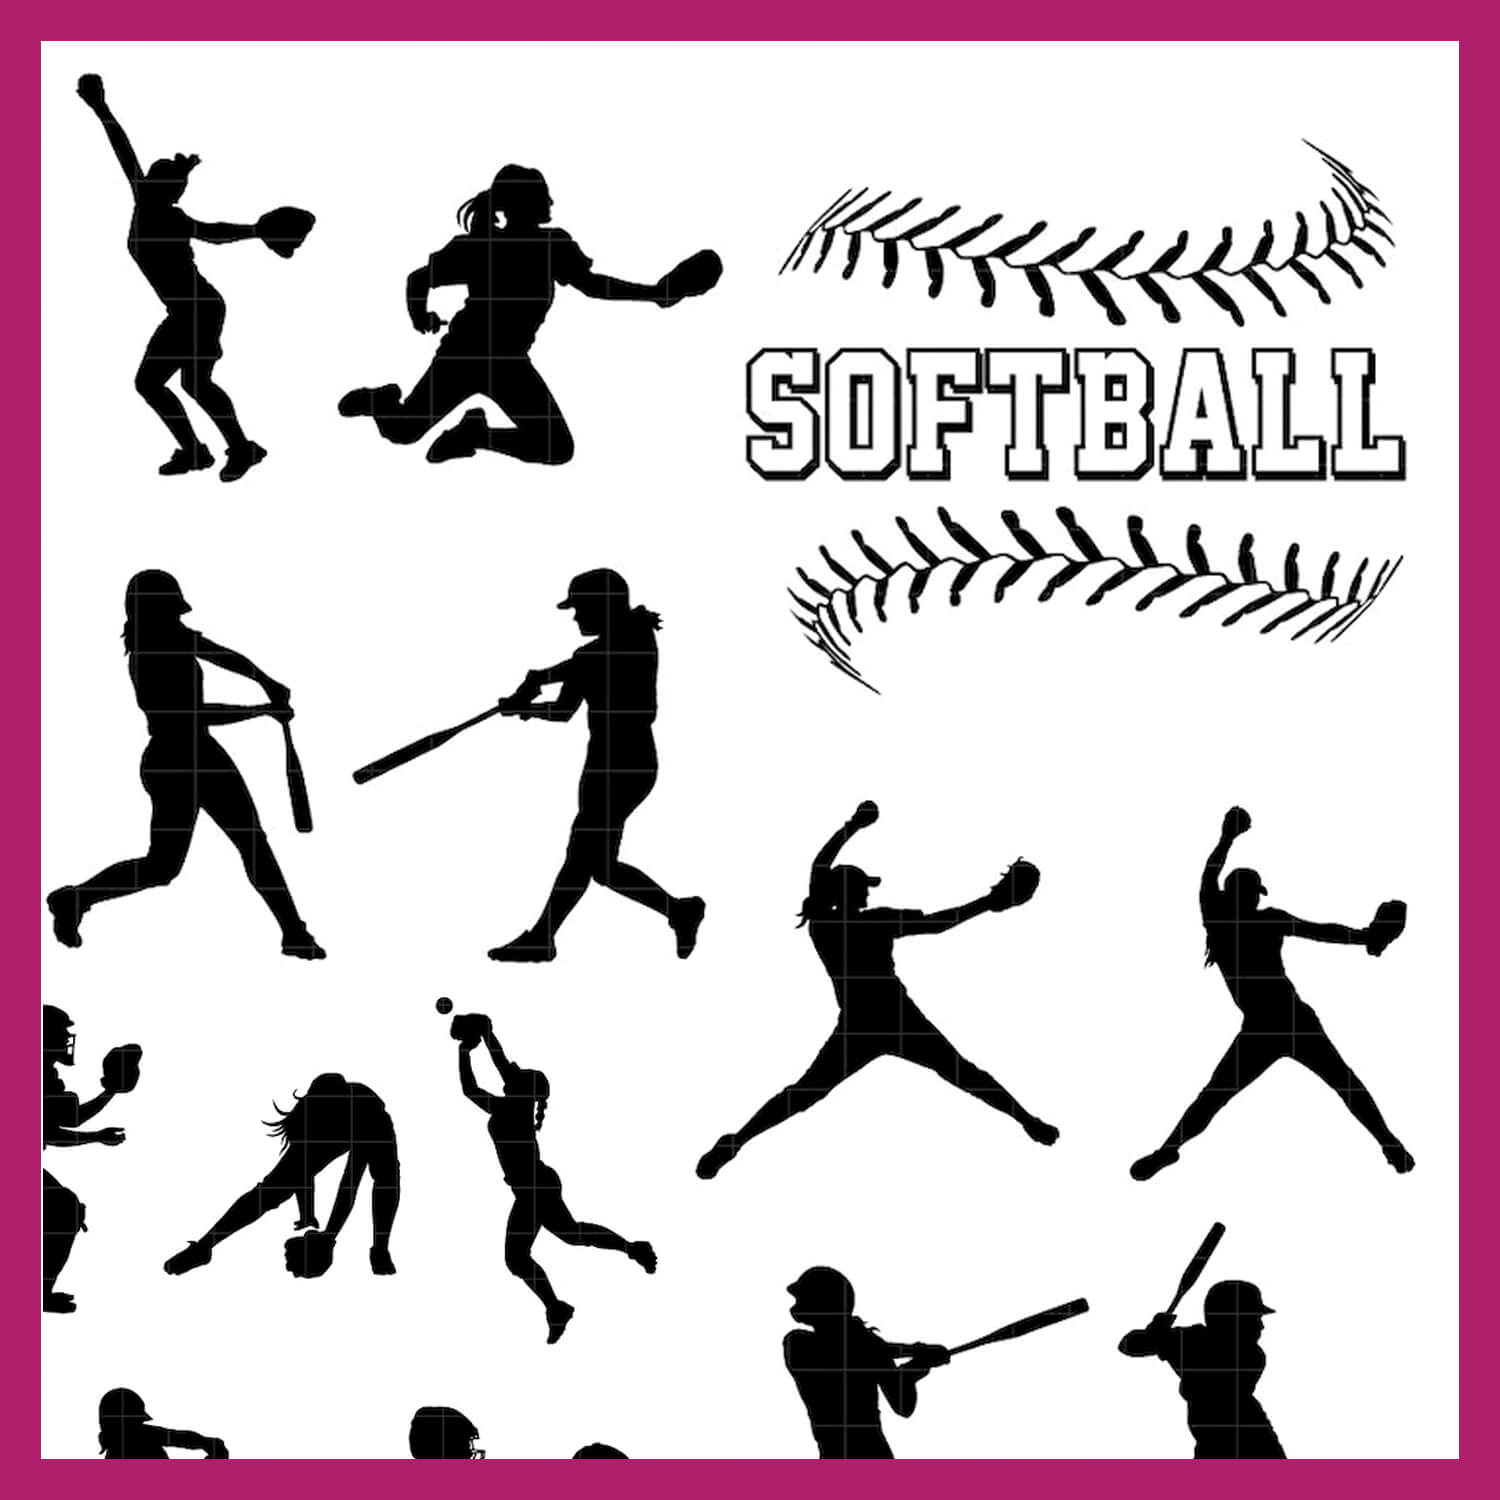 Softball player bundle with design for cricuts silhouettes.